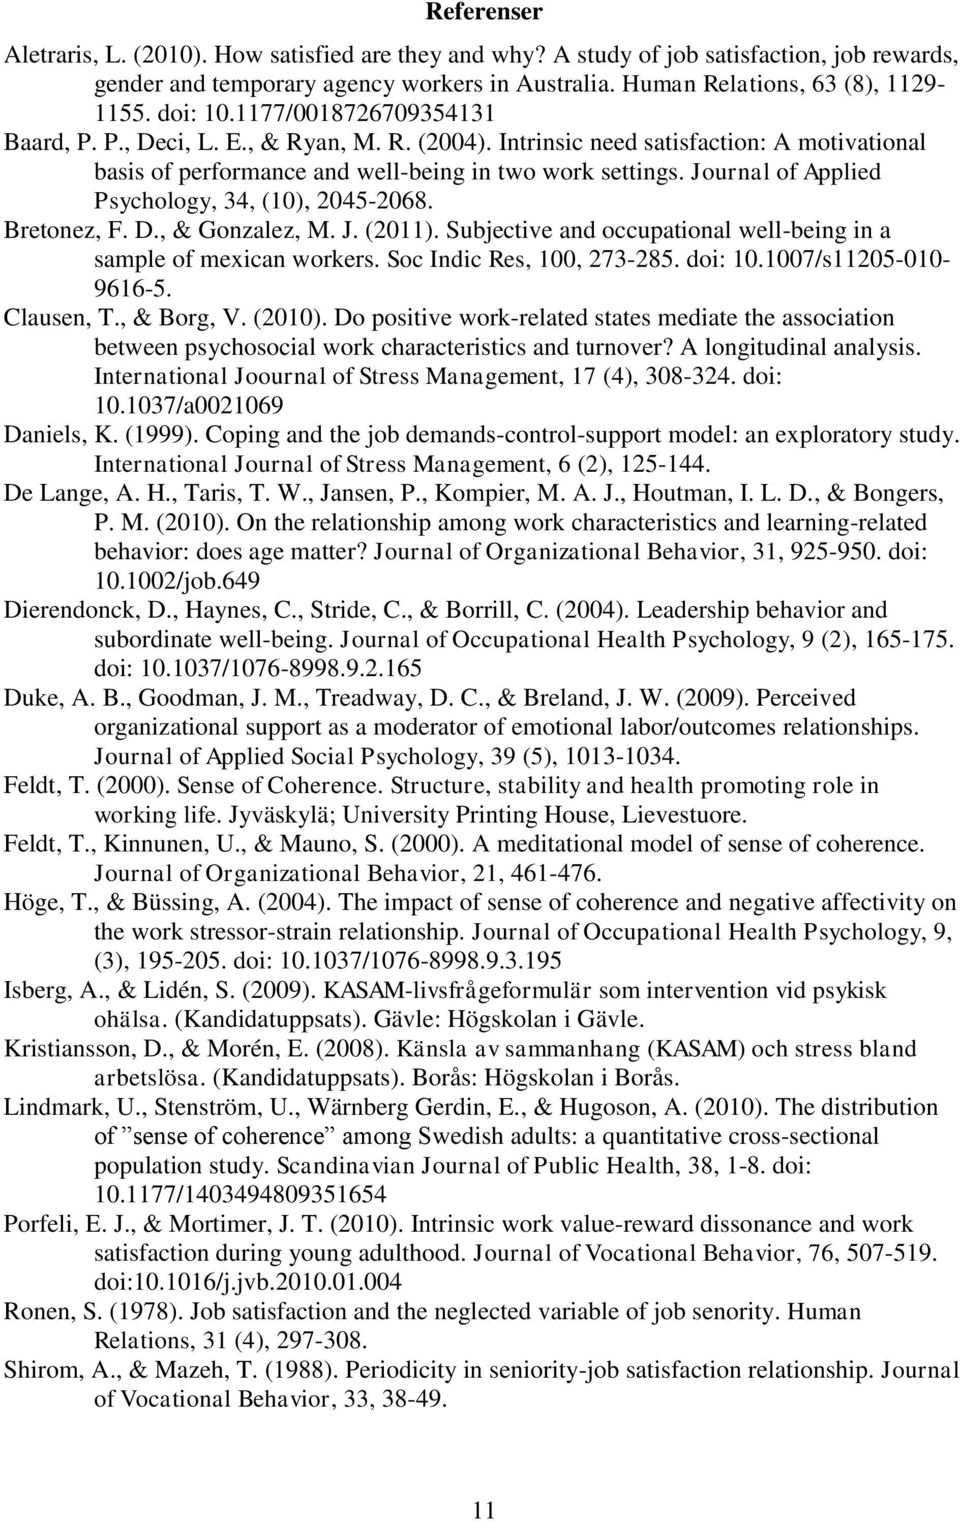 Journal of Applied Psychology, 34, (10), 2045-2068. Bretonez, F. D., & Gonzalez, M. J. (2011). Subjective and occupational well-being in a sample of mexican workers. Soc Indic Res, 100, 273-285.